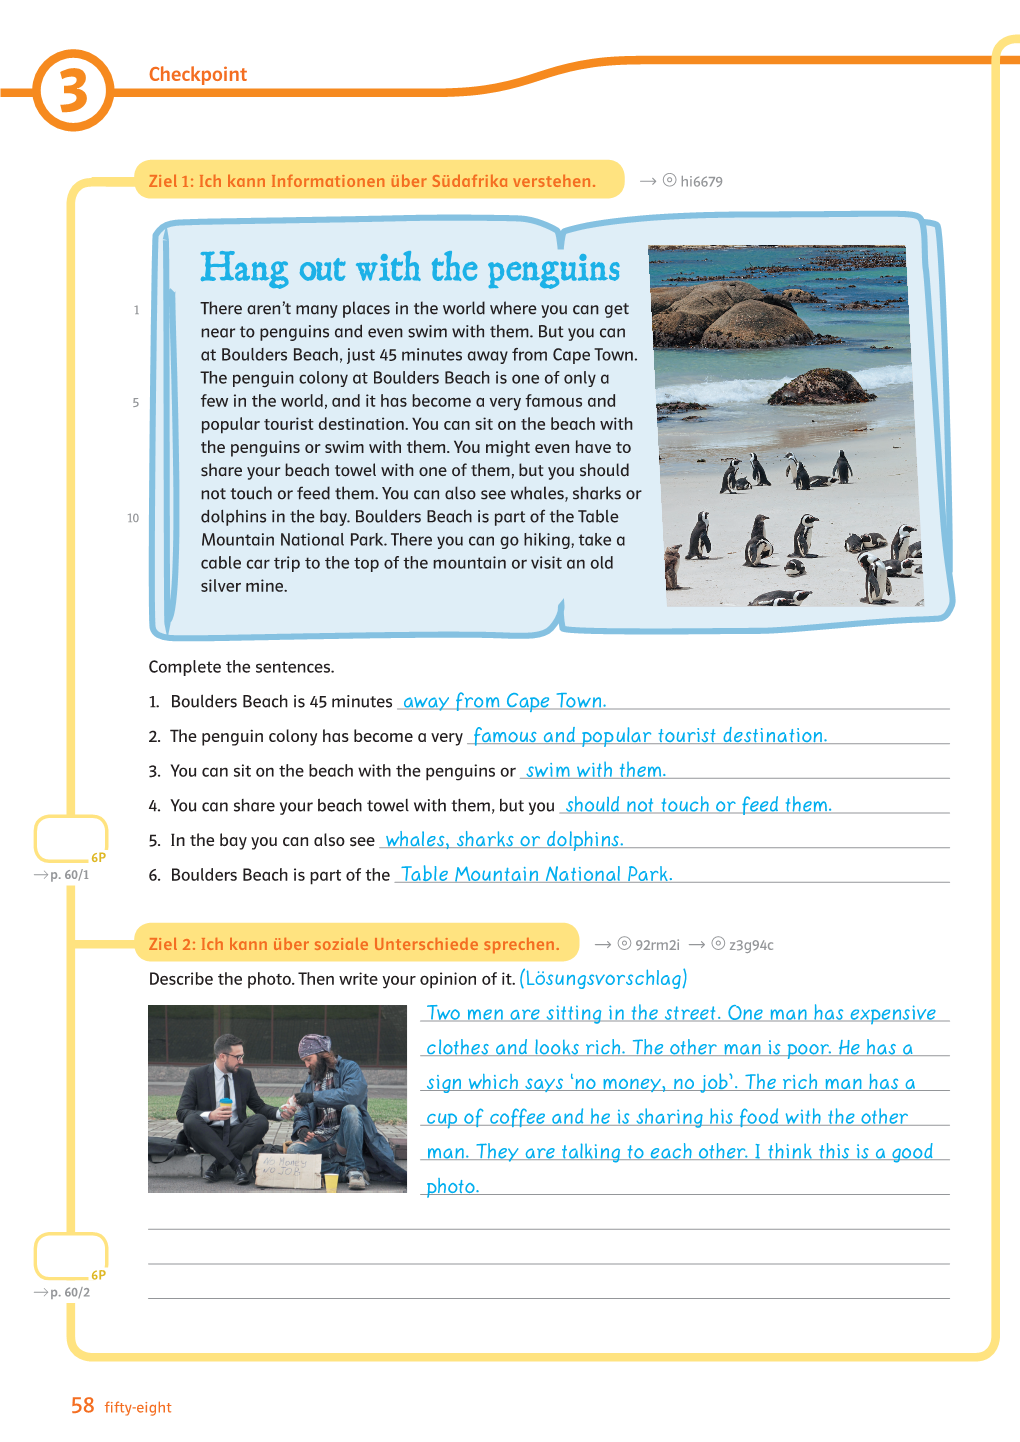 Hang out with the Penguins